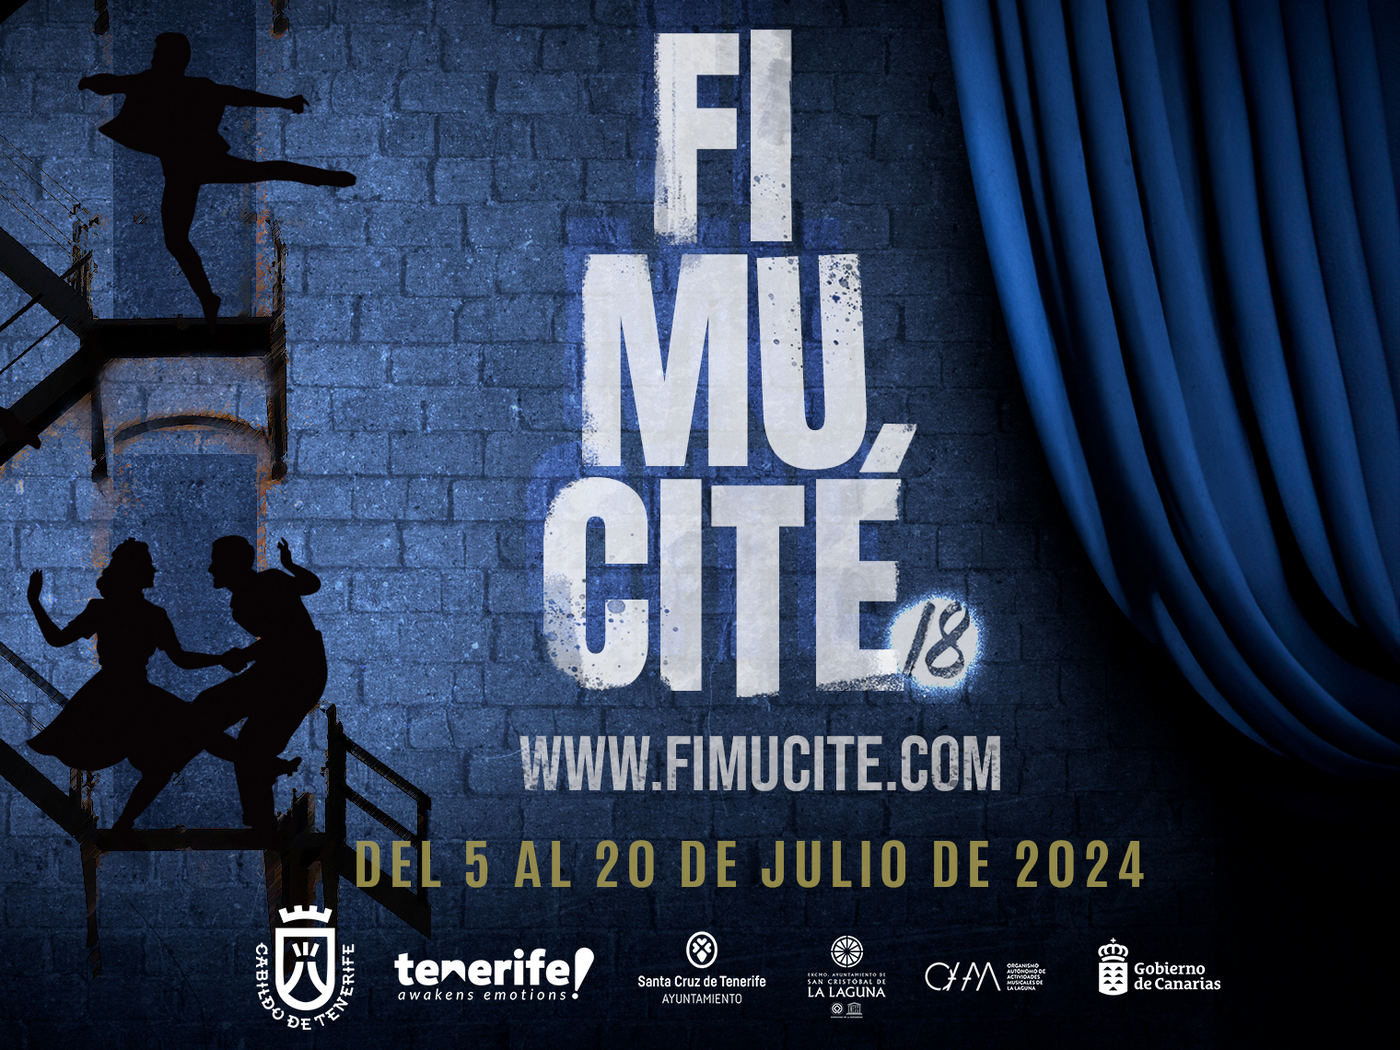 Fimucité will celebrate its 18th anniversary in style to the rhythm of musicals